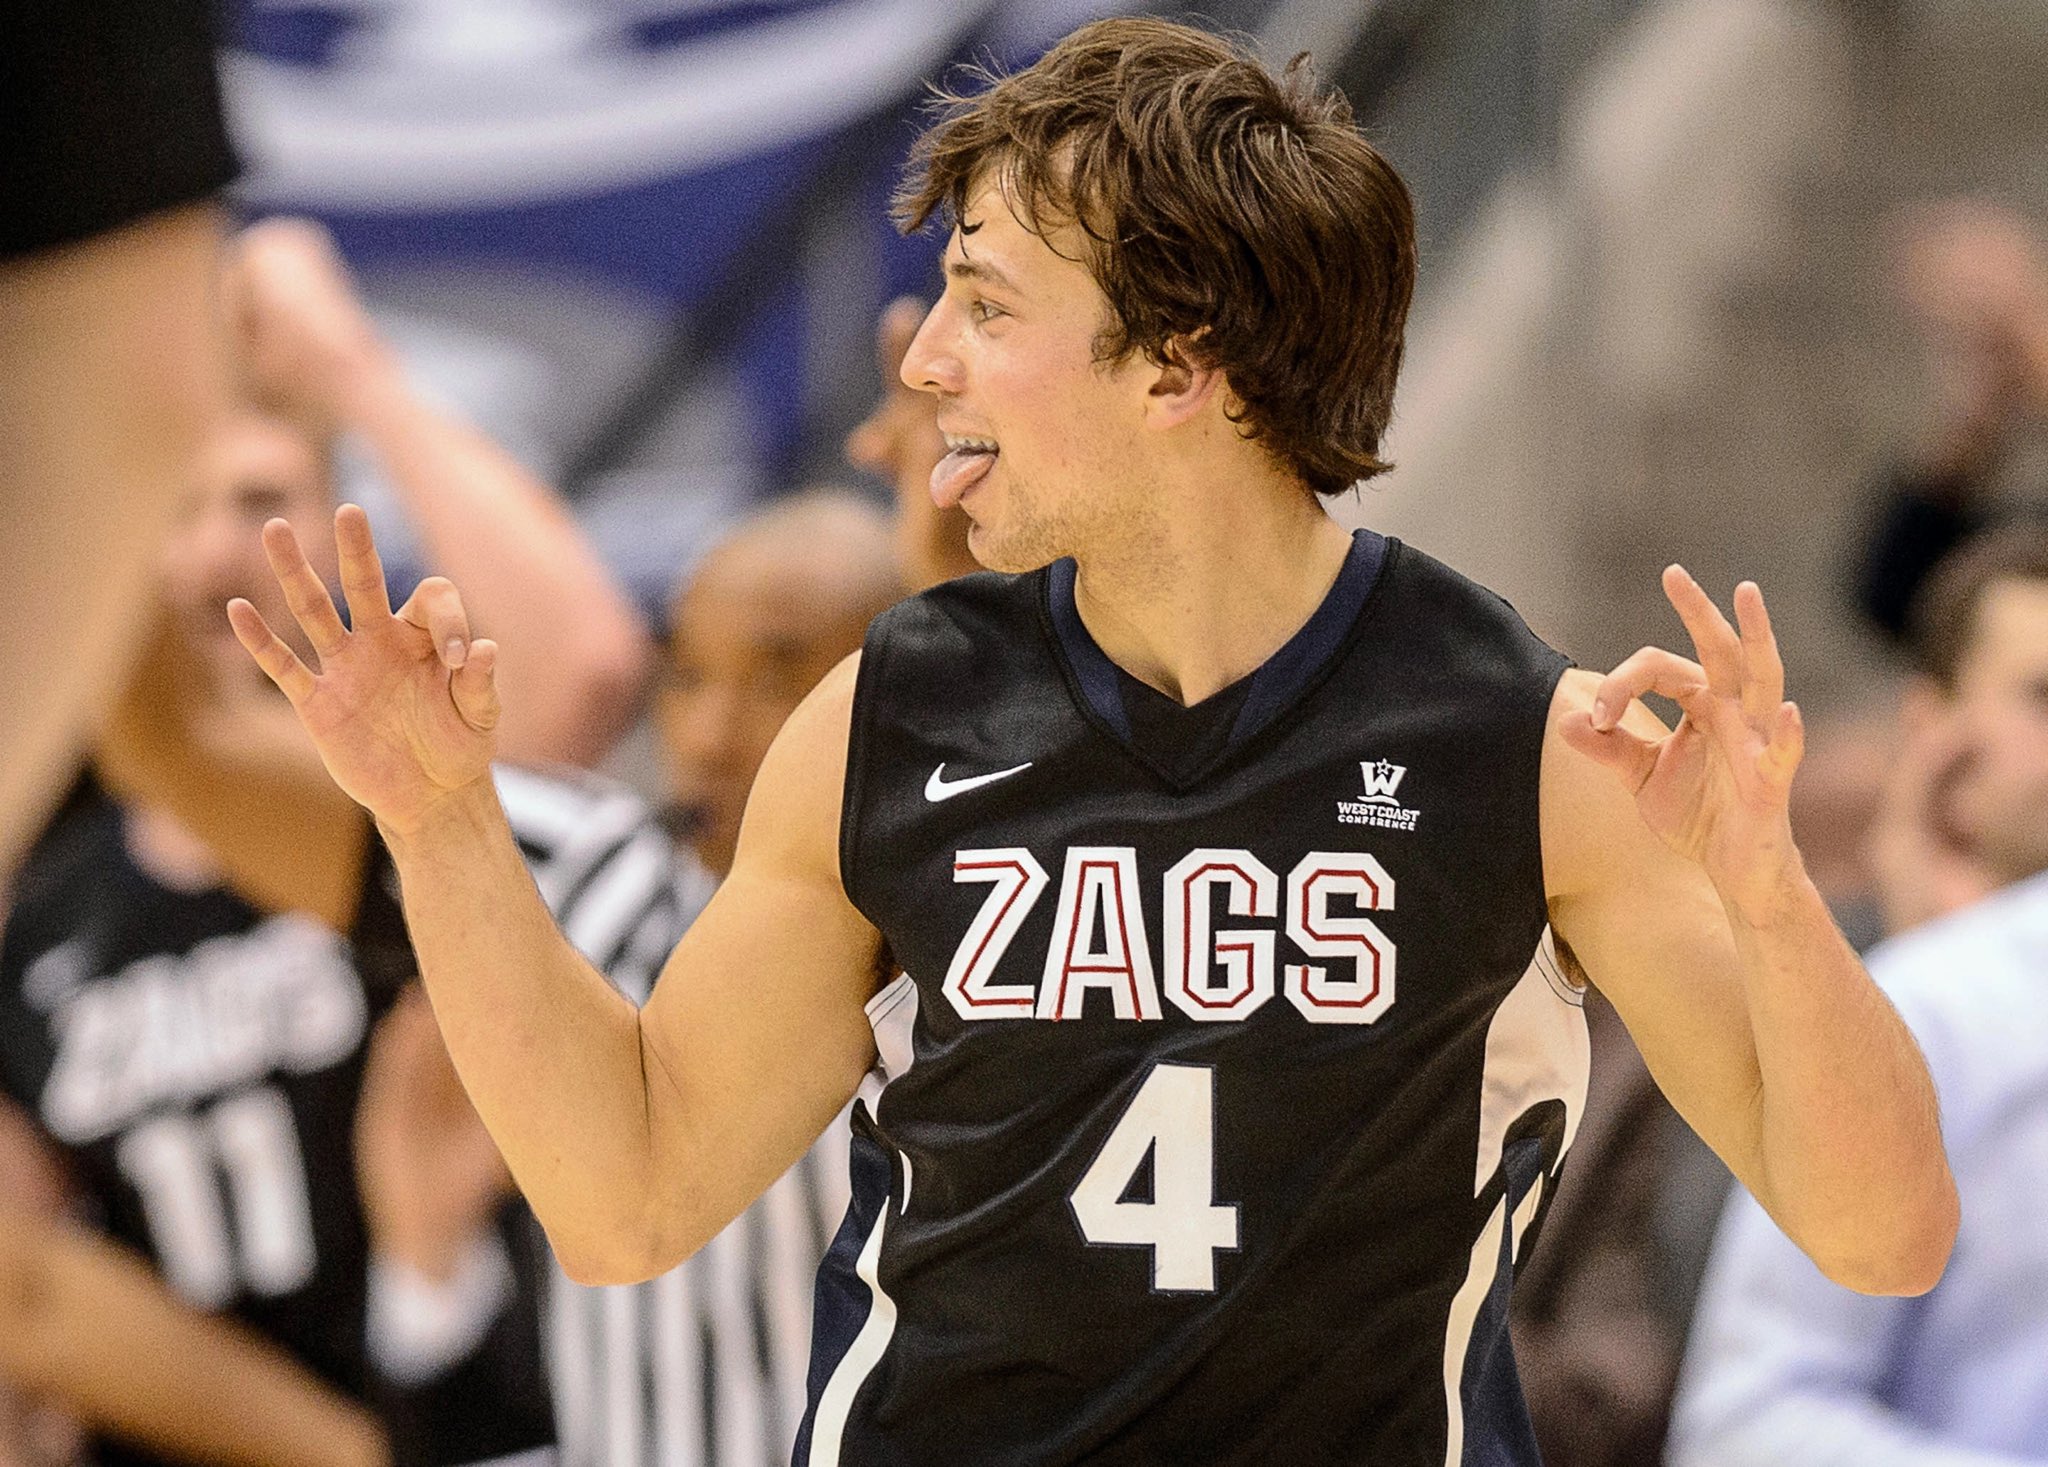 Happy birthday to the 3 point king Kevin Pangos 